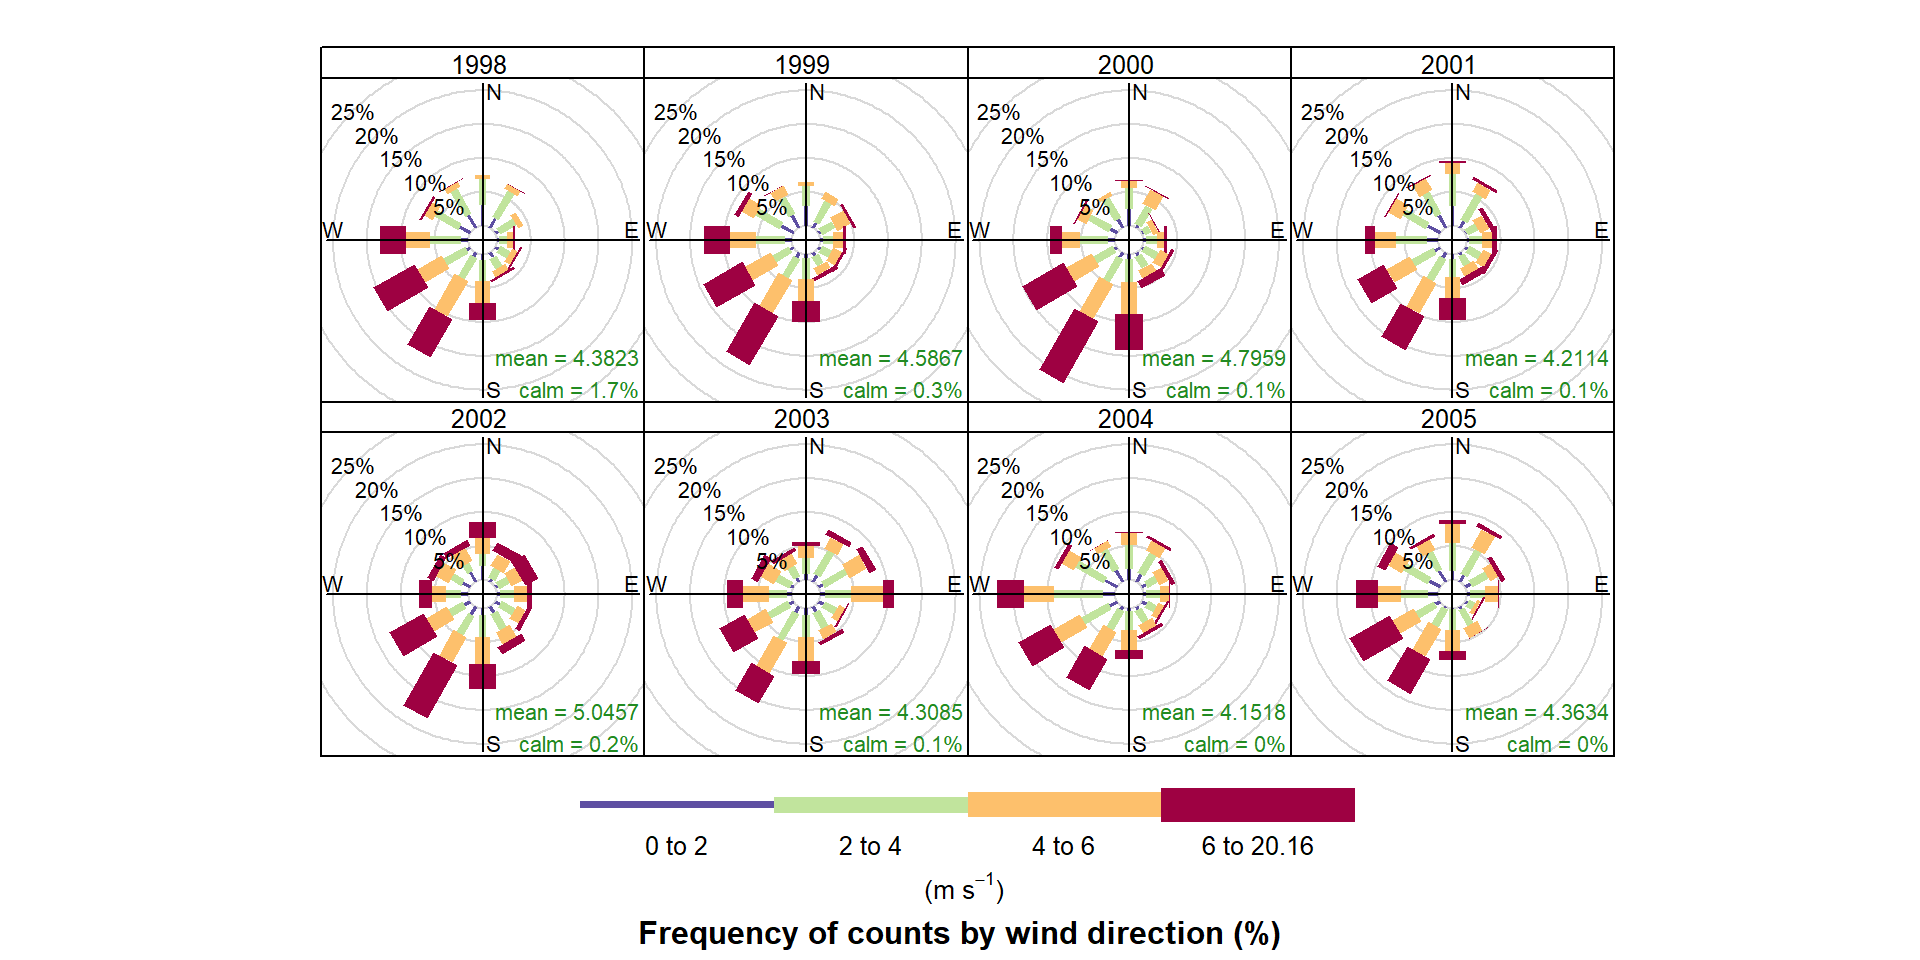 Polar bar charts showing the proportion of wind coming from 12 compass directions. There are 8 charts, each representing a year of data from 1998 to 2005. While there is a small amount of variation, the dominant wind direction for each year is from the south west.